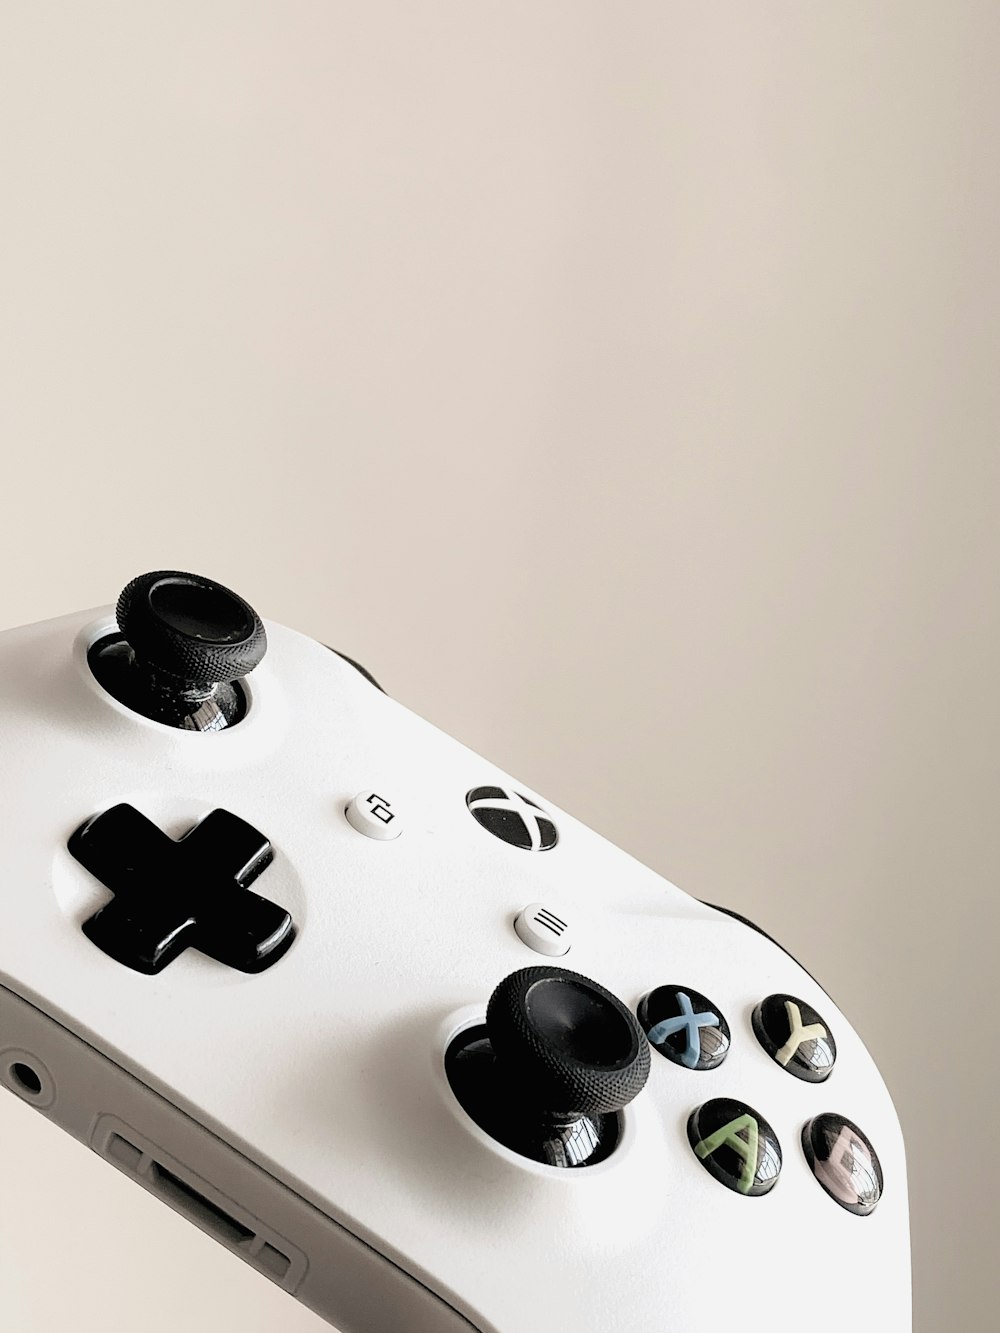 white and black xbox one game controller